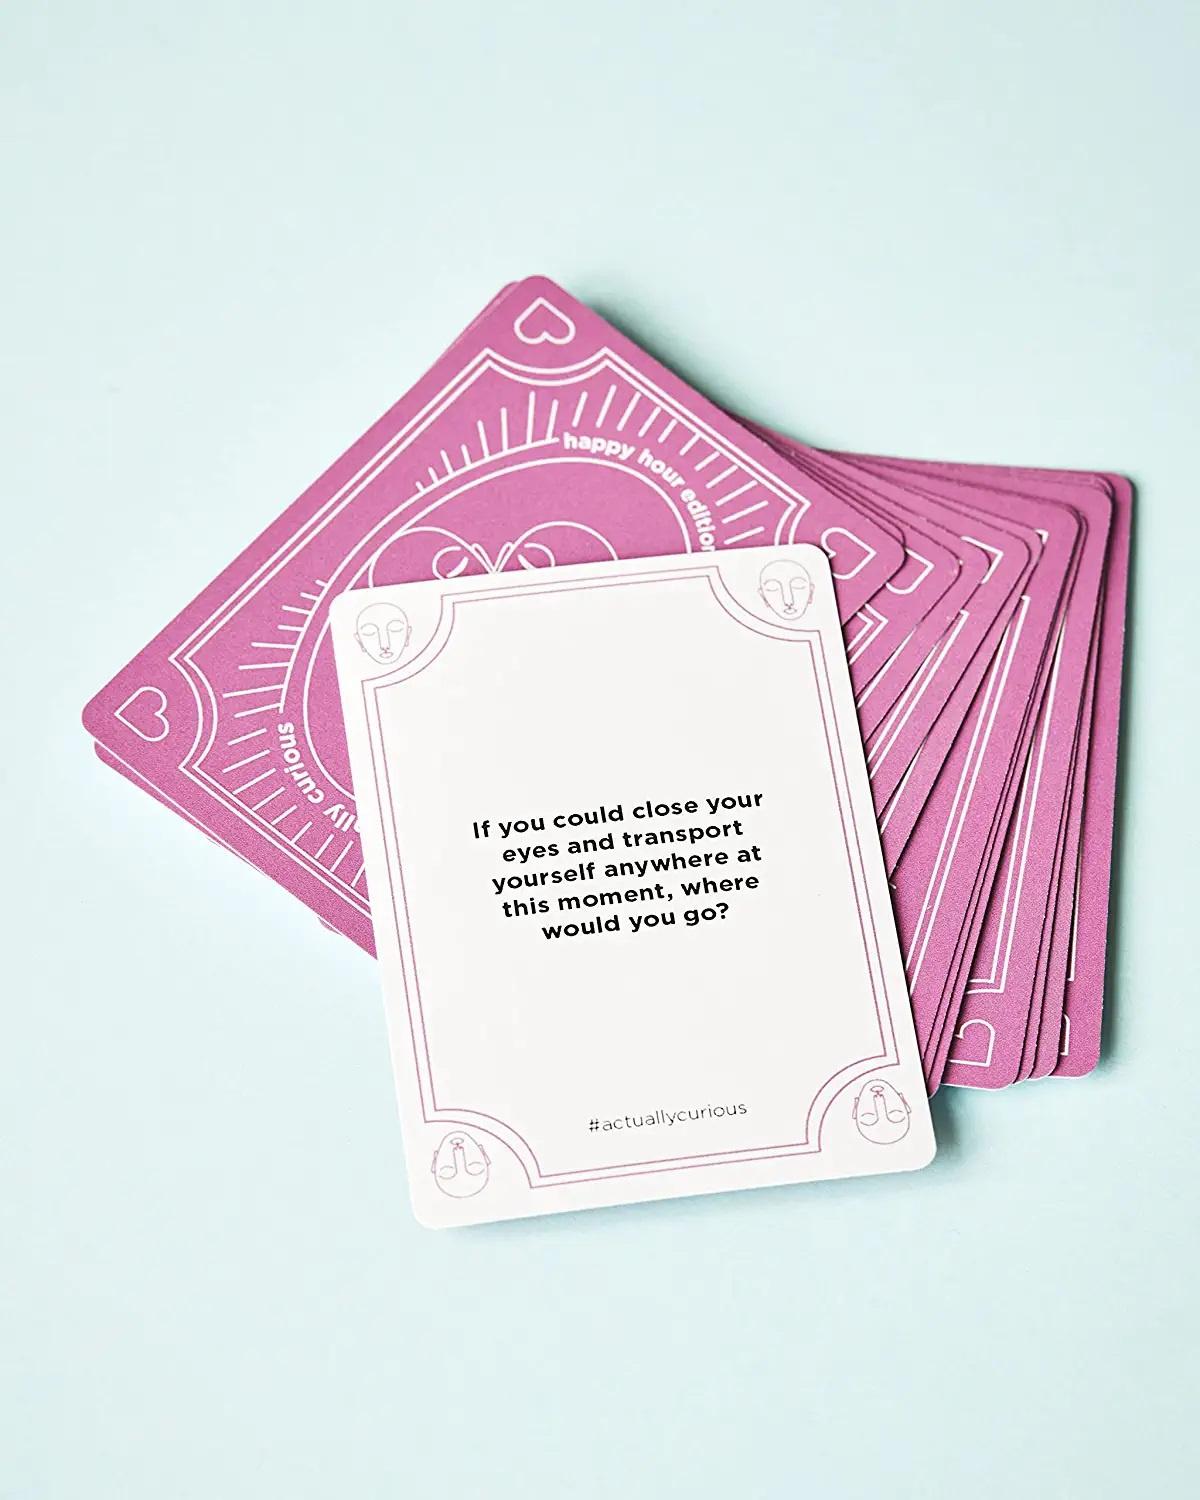 Ice-breaker couples card game gift for first anniversary